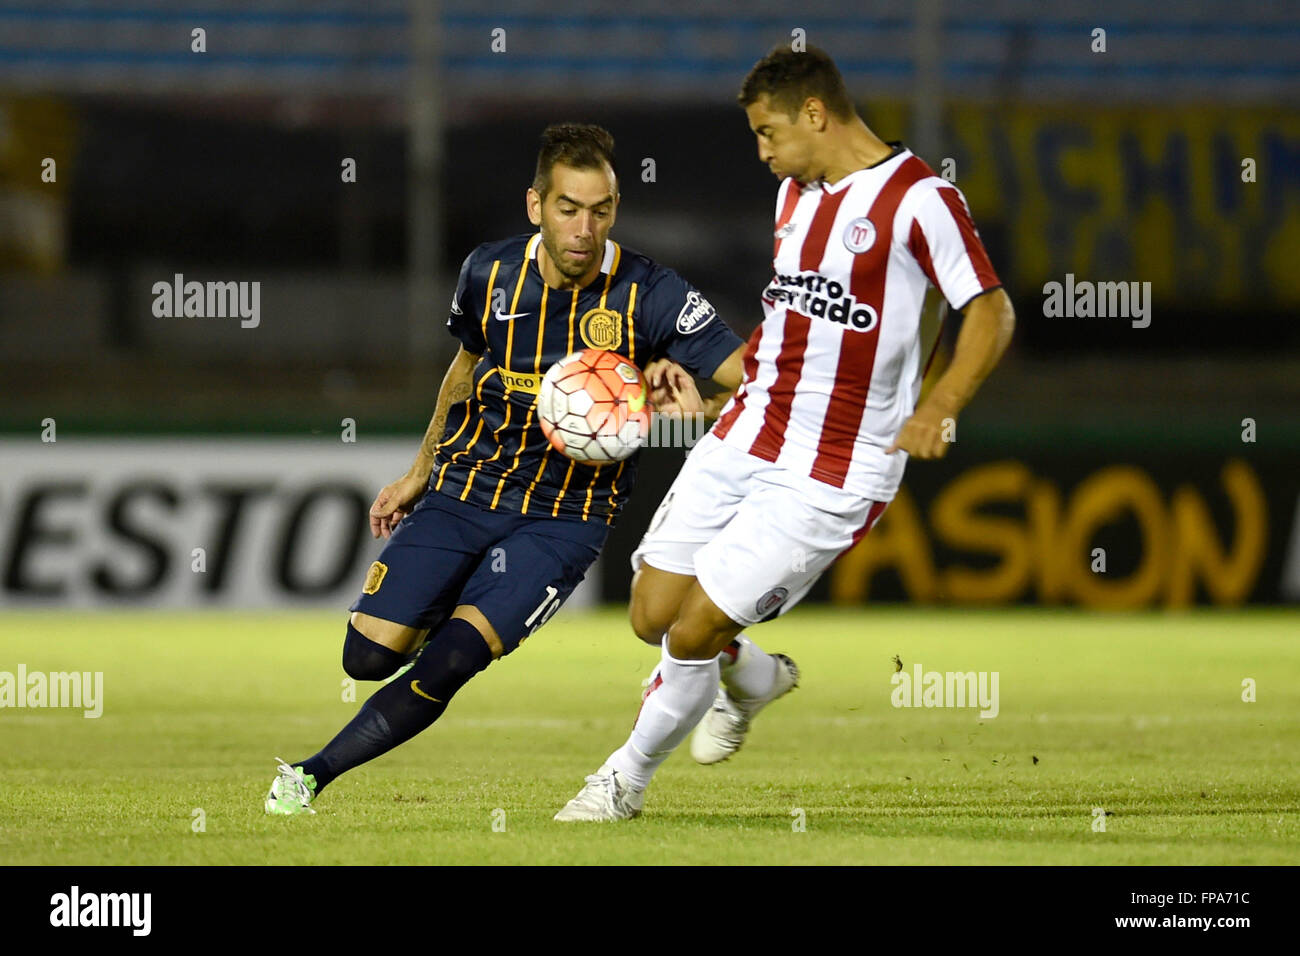 Montevideo, Uruguay. 17th Mar, 2106. Diego Rodriguez (R) of Uruguay's River Plate vies for the ball with Cesar Fabian Delgado (L) of Argentina's Rosario Central, during the Group 2 match of the Libertadores Cup, held at Centenario Stadium in Montevideo, capital of Uruguay, on March 17, 2106. Rosario Central won by 3-1. © Nicolas Celaya/Xinhua/Alamy Live News Stock Photo